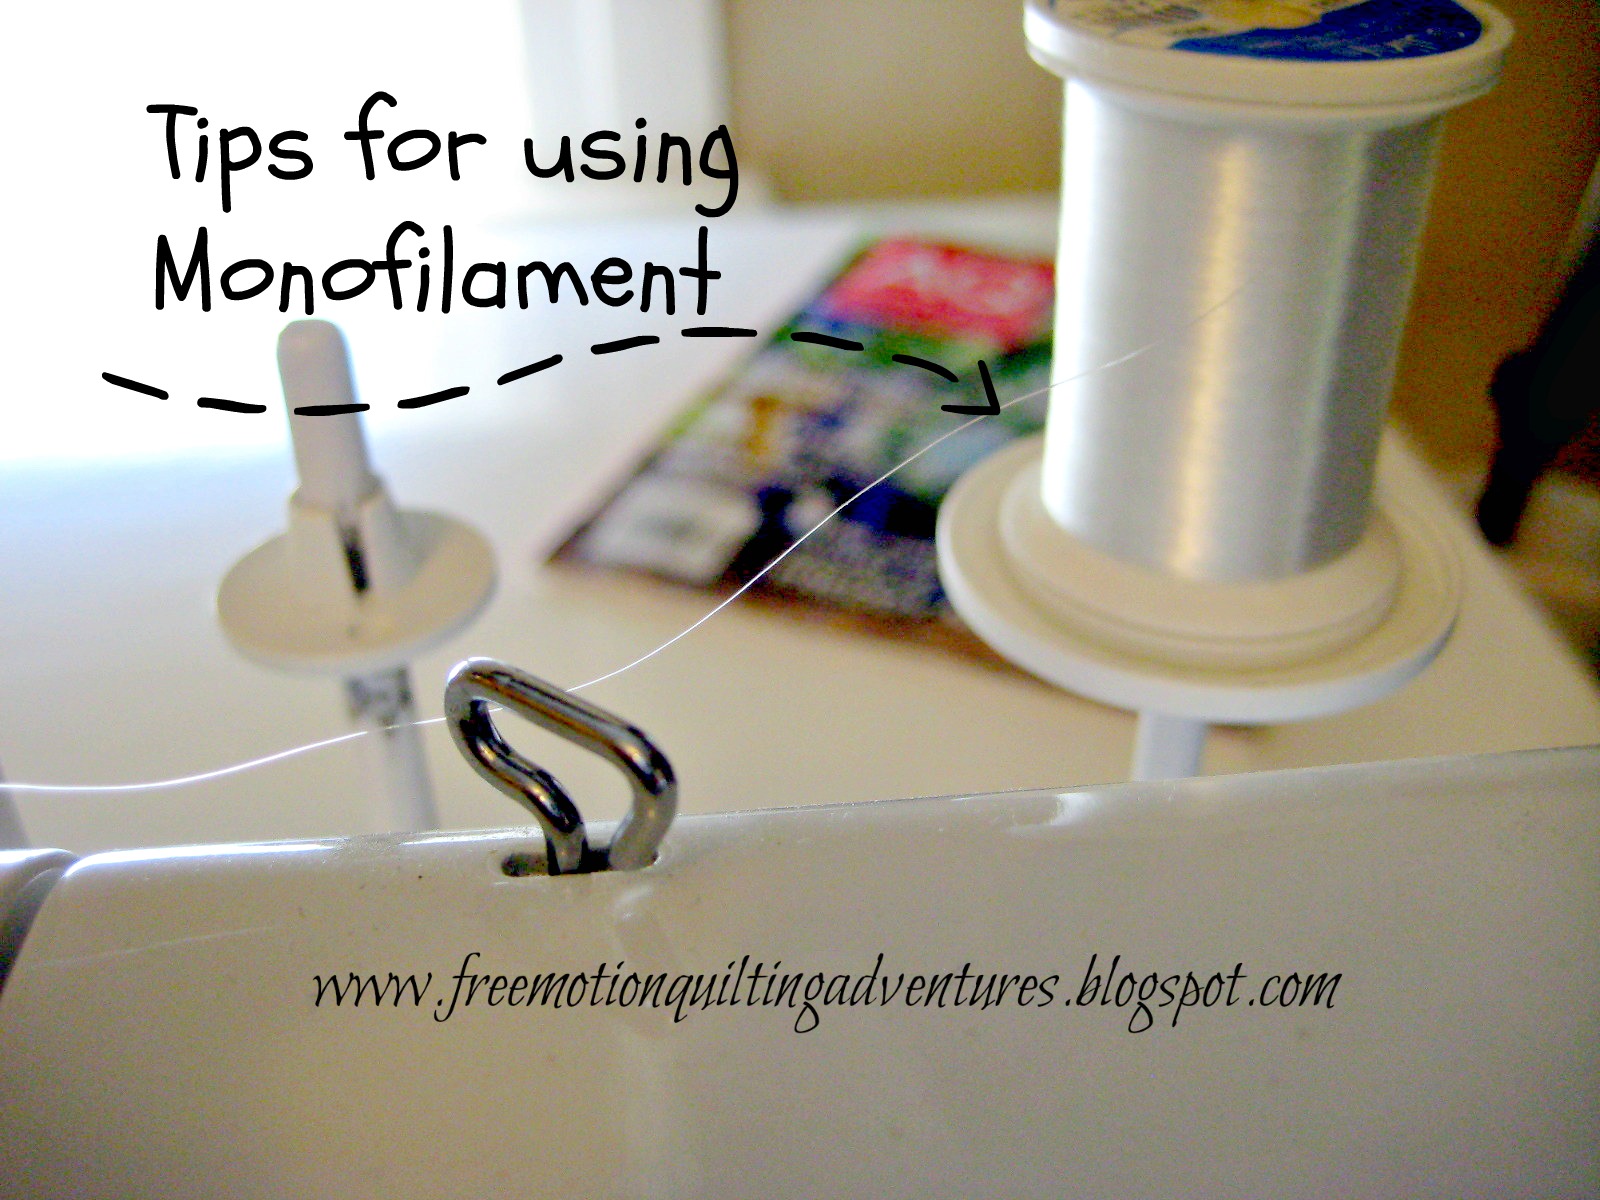 Amy's Free Motion Quilting Adventures: Tips for Using Monofilament